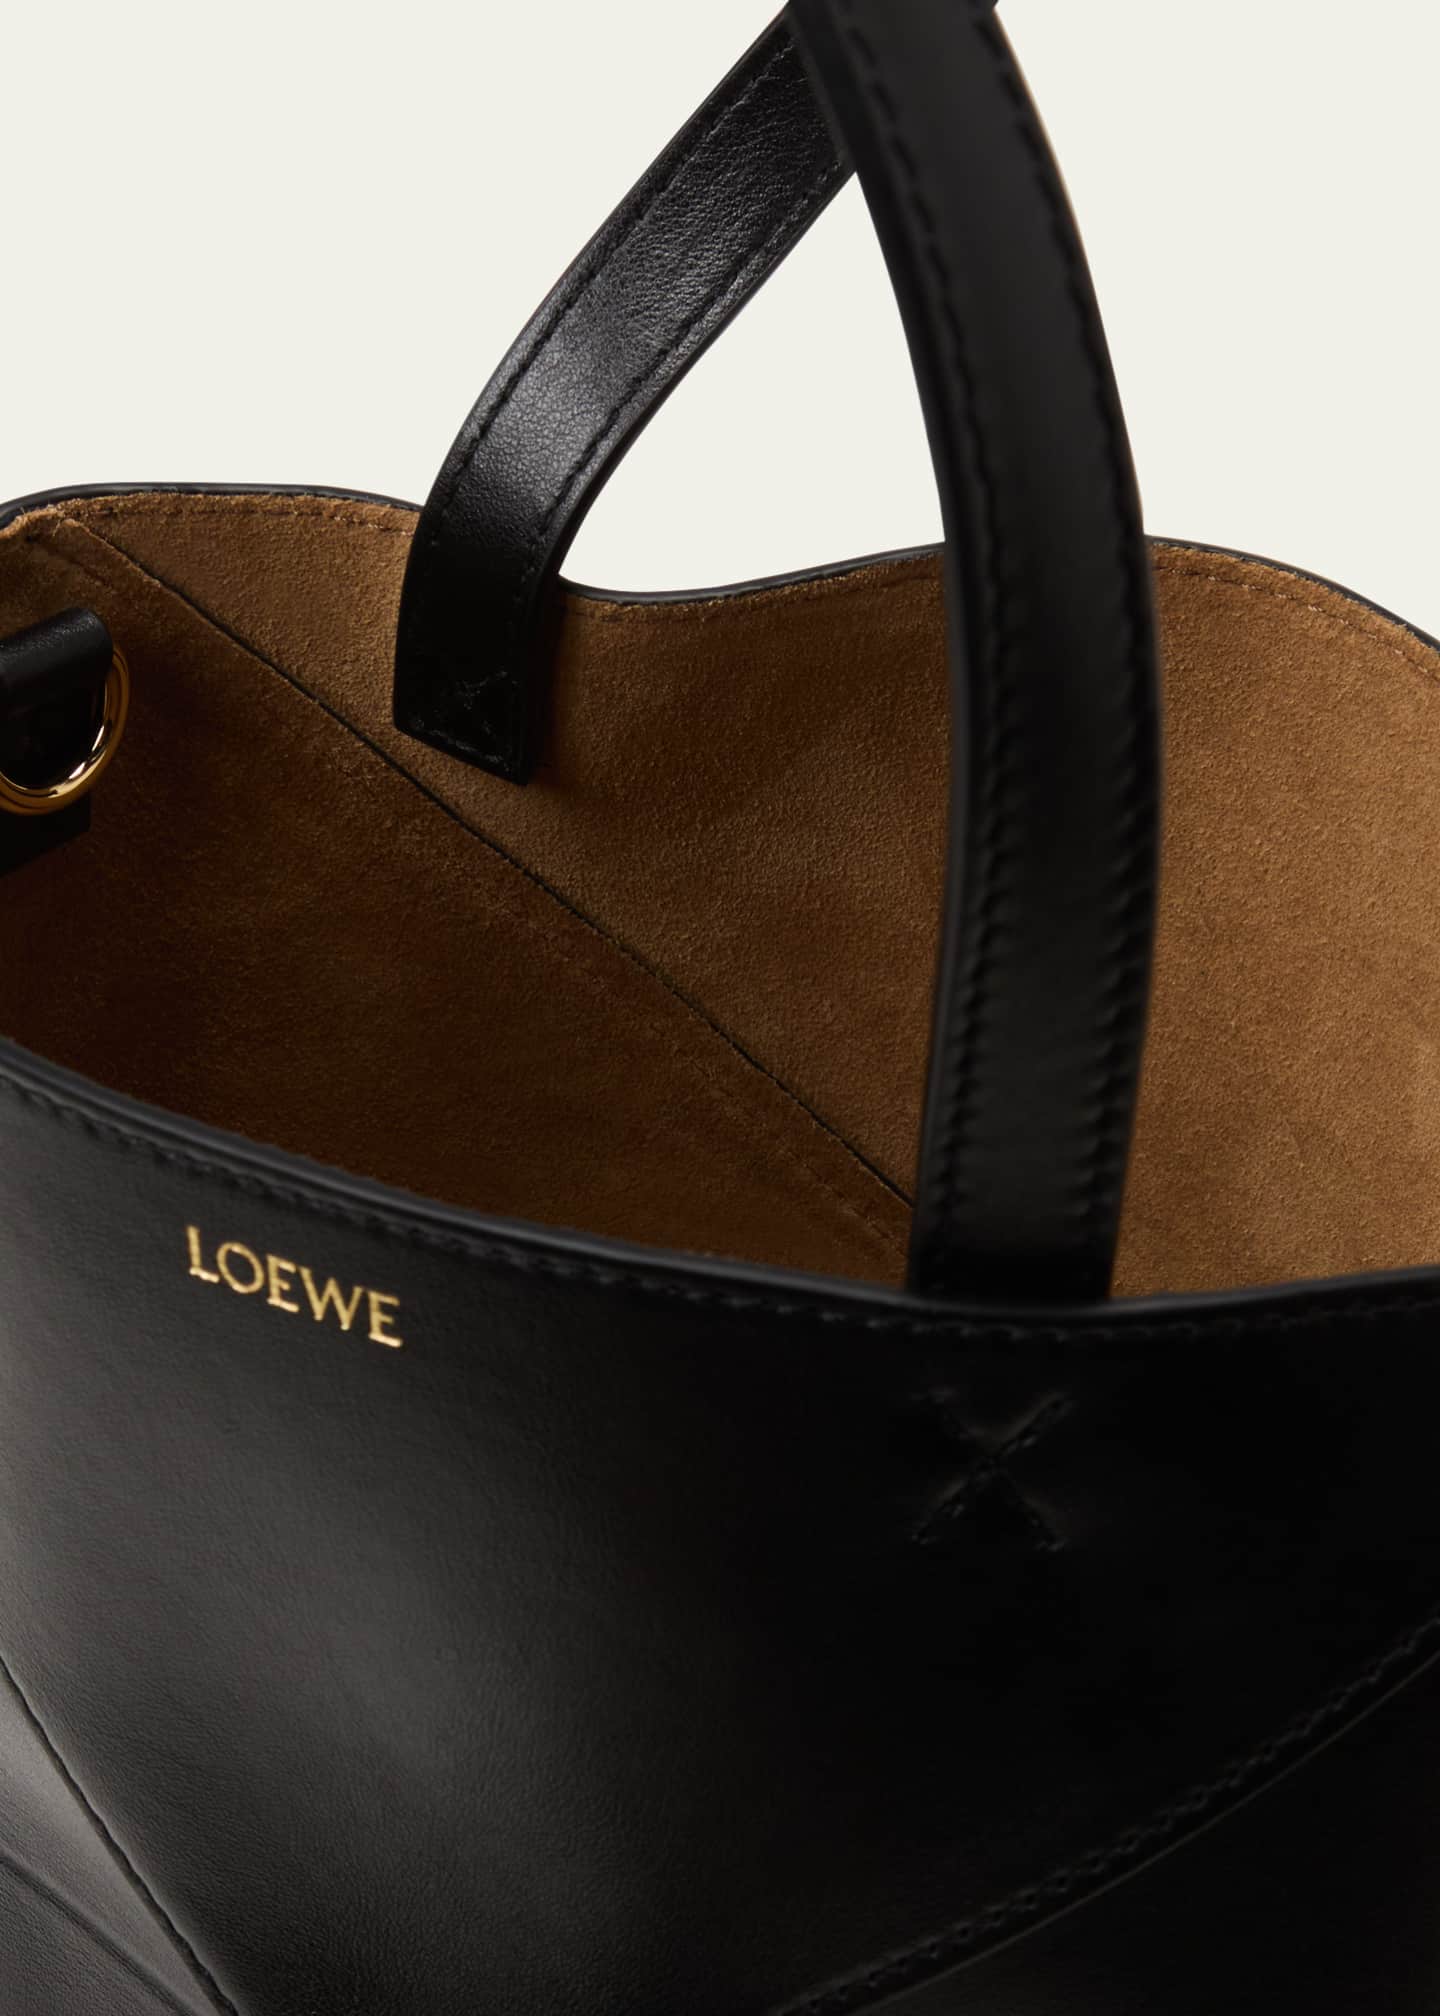 Loewe's Gradient Puzzle Bag Is a Unique Take on a Classic Design